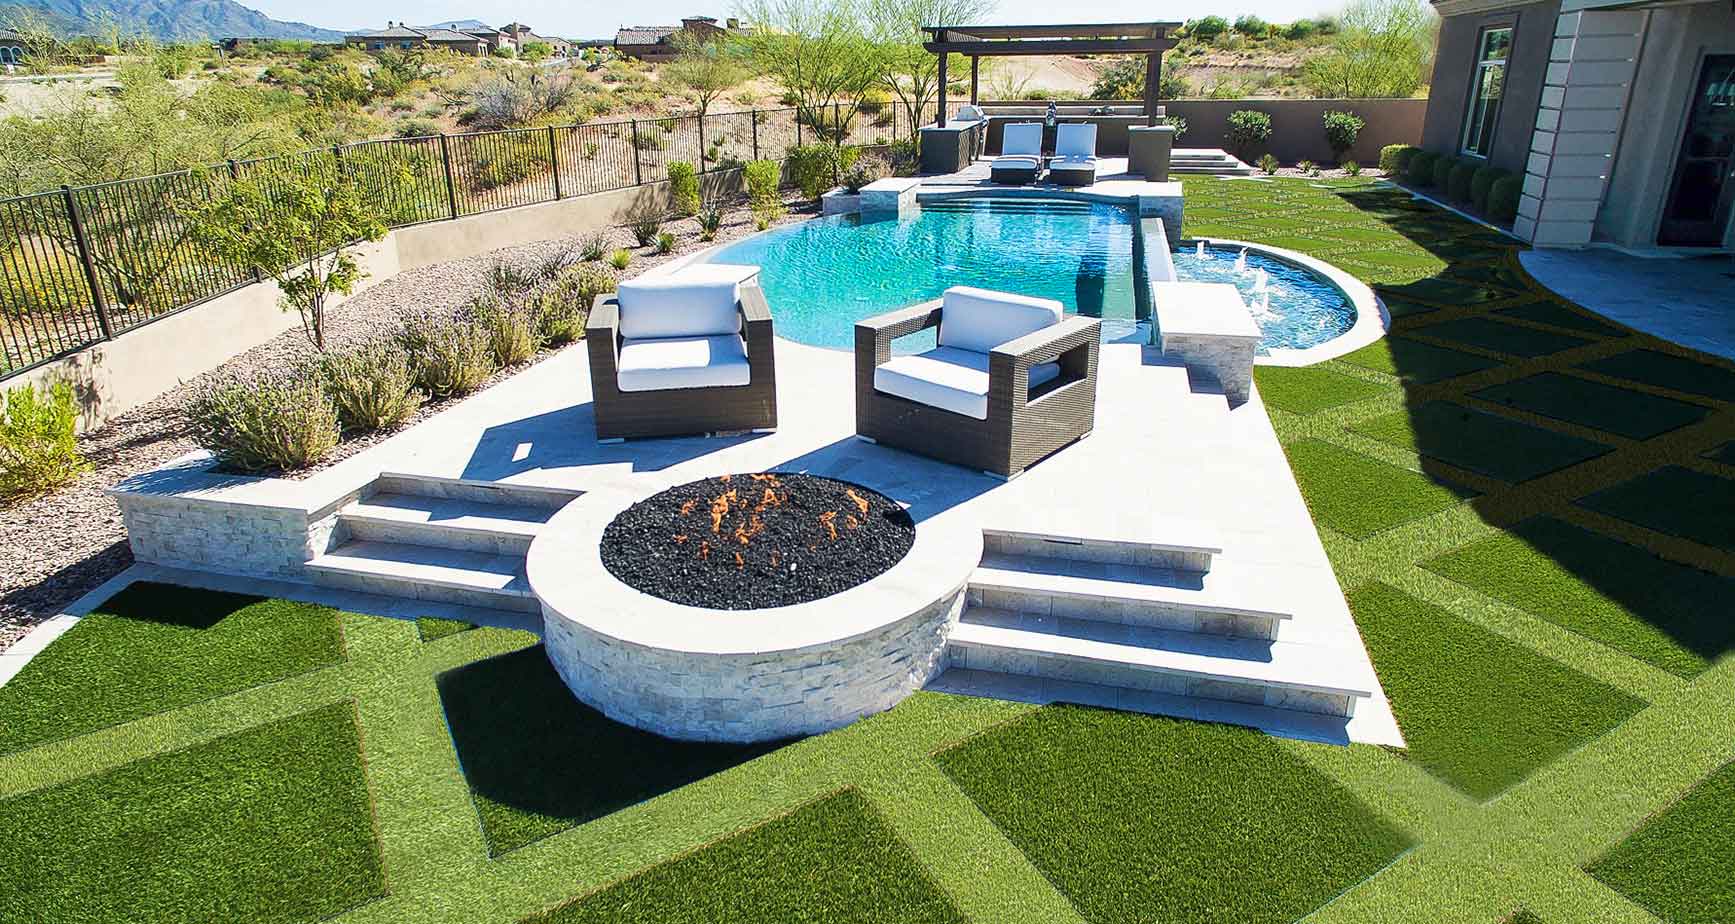 Artificial grass backyard with pool and fire pit area